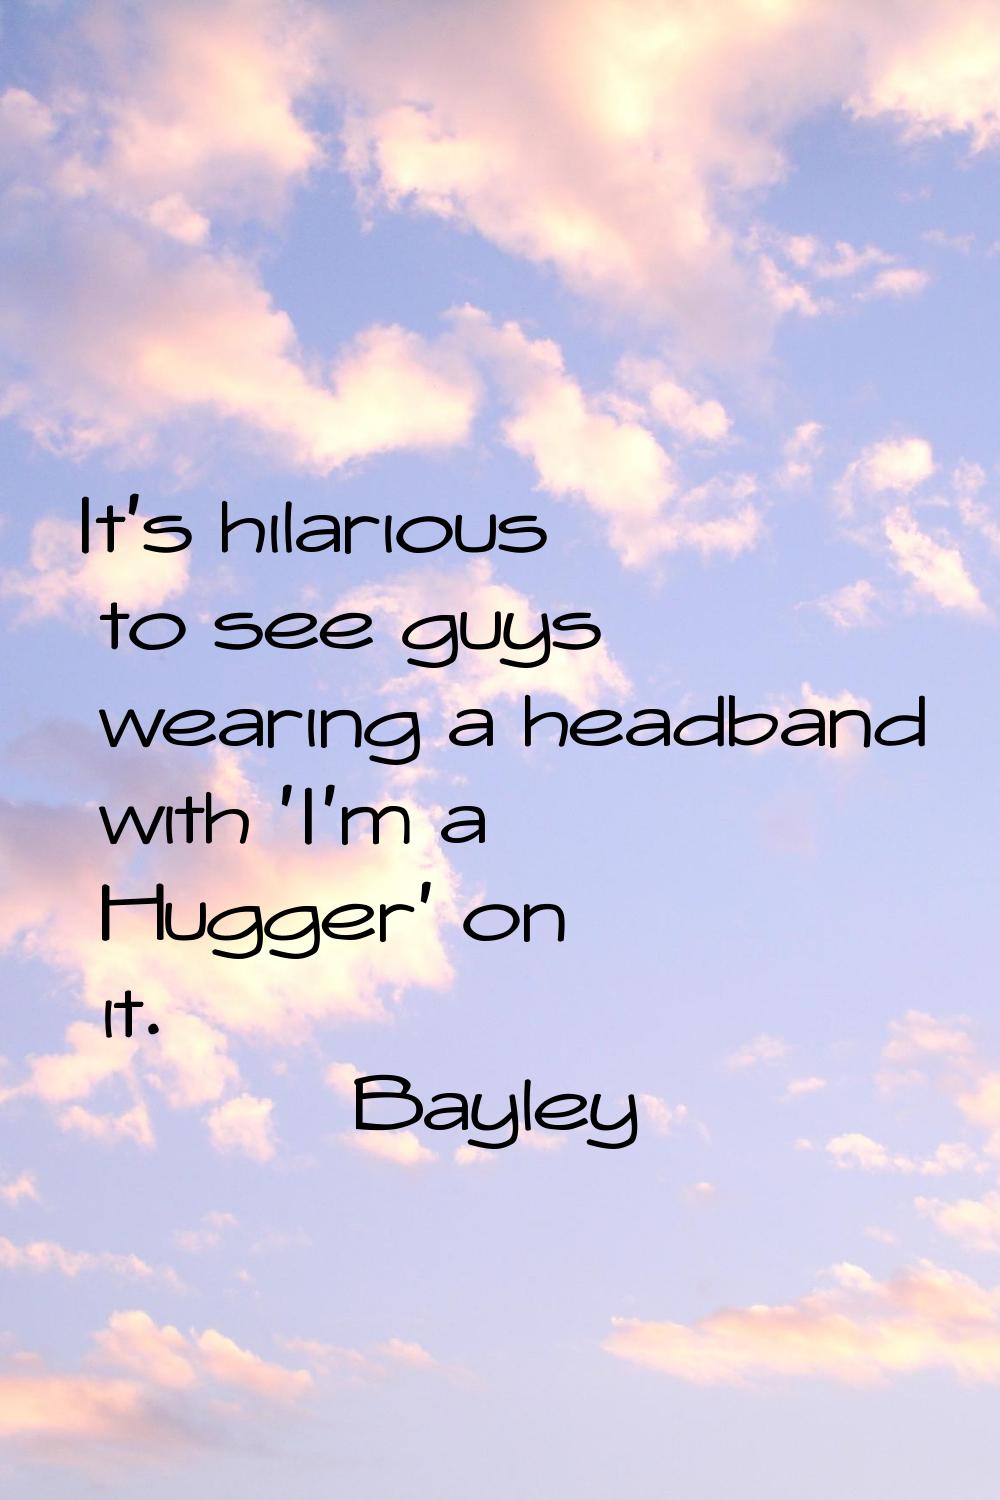 It's hilarious to see guys wearing a headband with 'I'm a Hugger' on it.